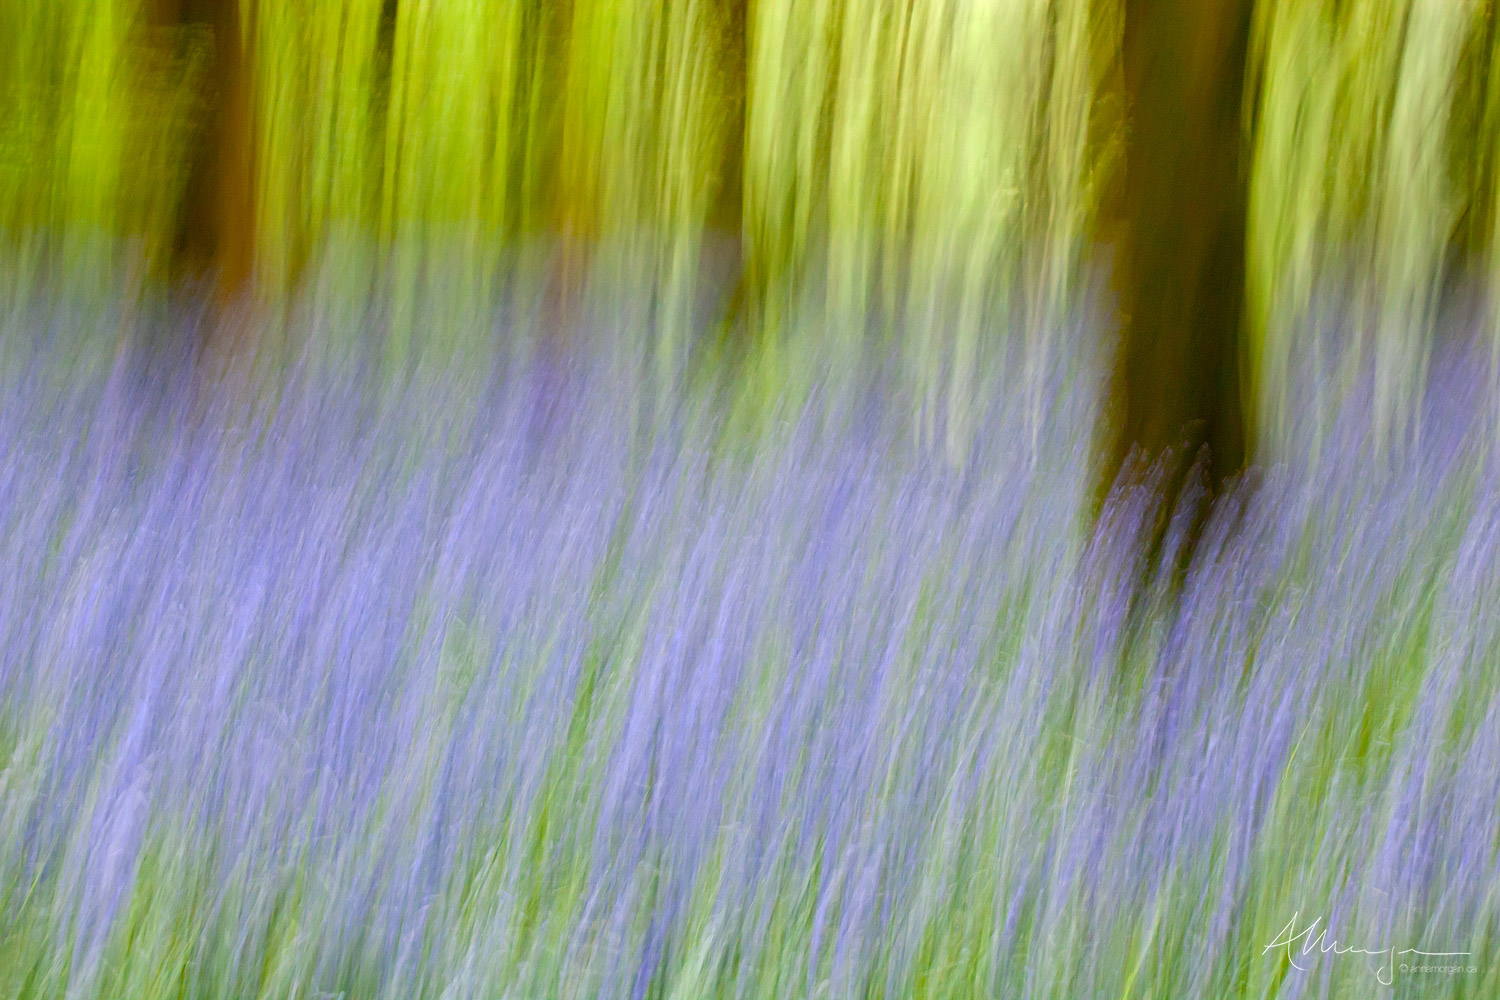 An ICM image of bluebells in a Beech forest